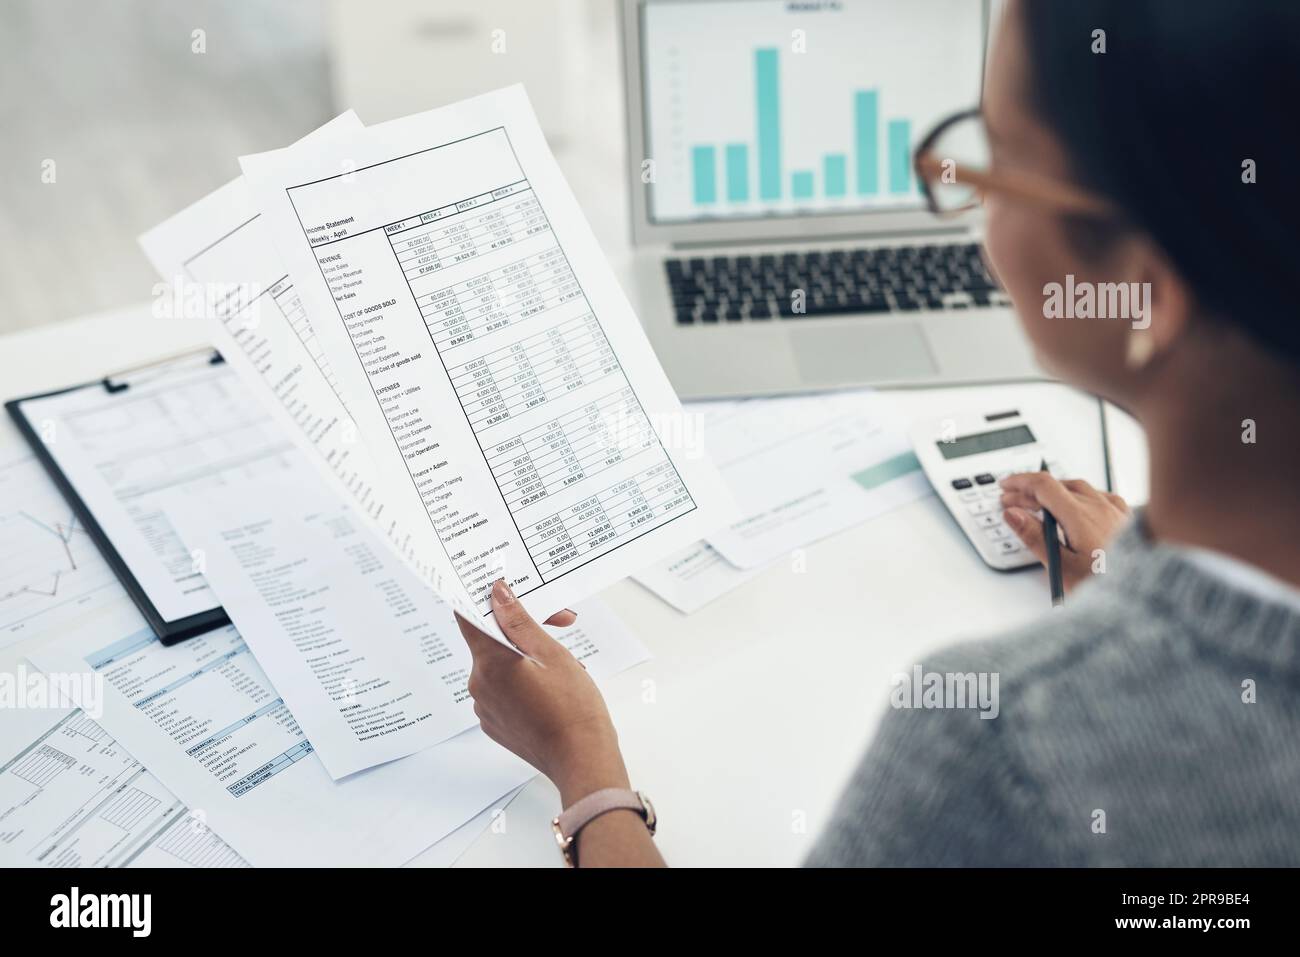 Reviewing her documents needed for filing. Closeup shot of an unrecognisable businesswoman calculating finances in an office. Stock Photo